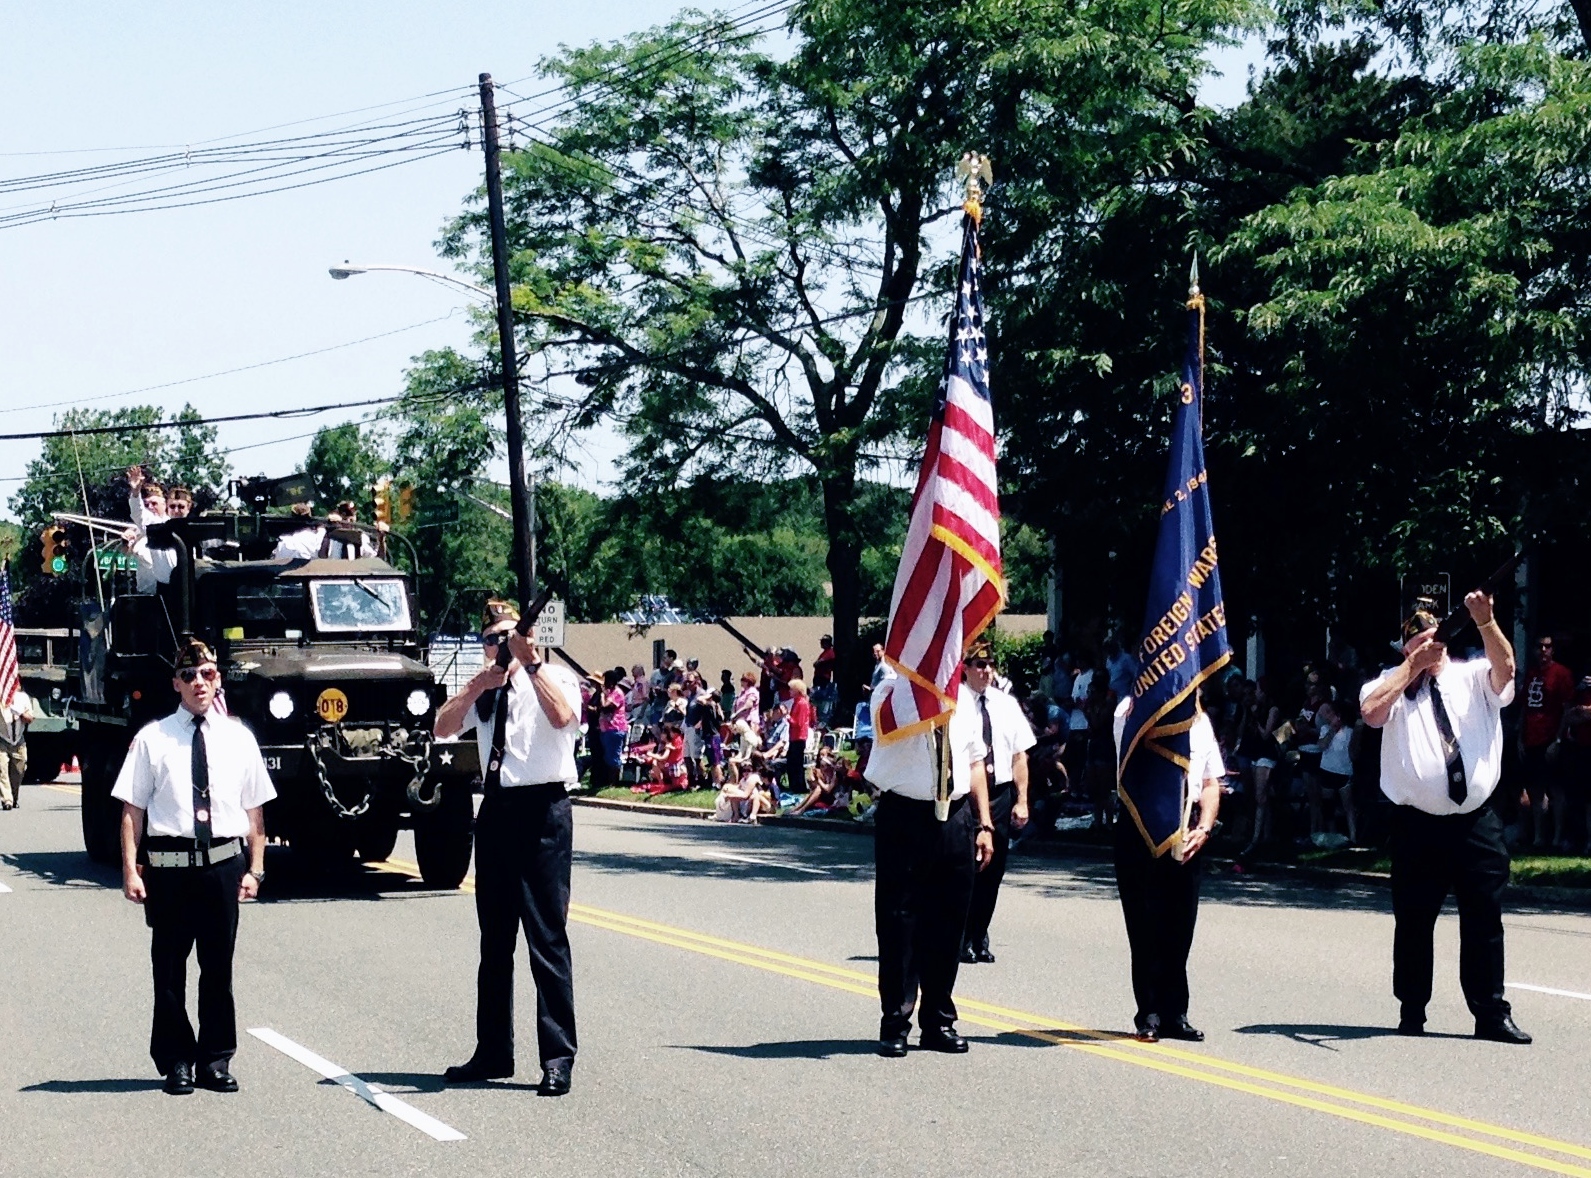  2015 Fourth of July Parade -&nbsp;Scott, Jack and Randy, with flag bearers Emerson &amp; Angel and&nbsp;Riflemen Len &amp; Dan. 